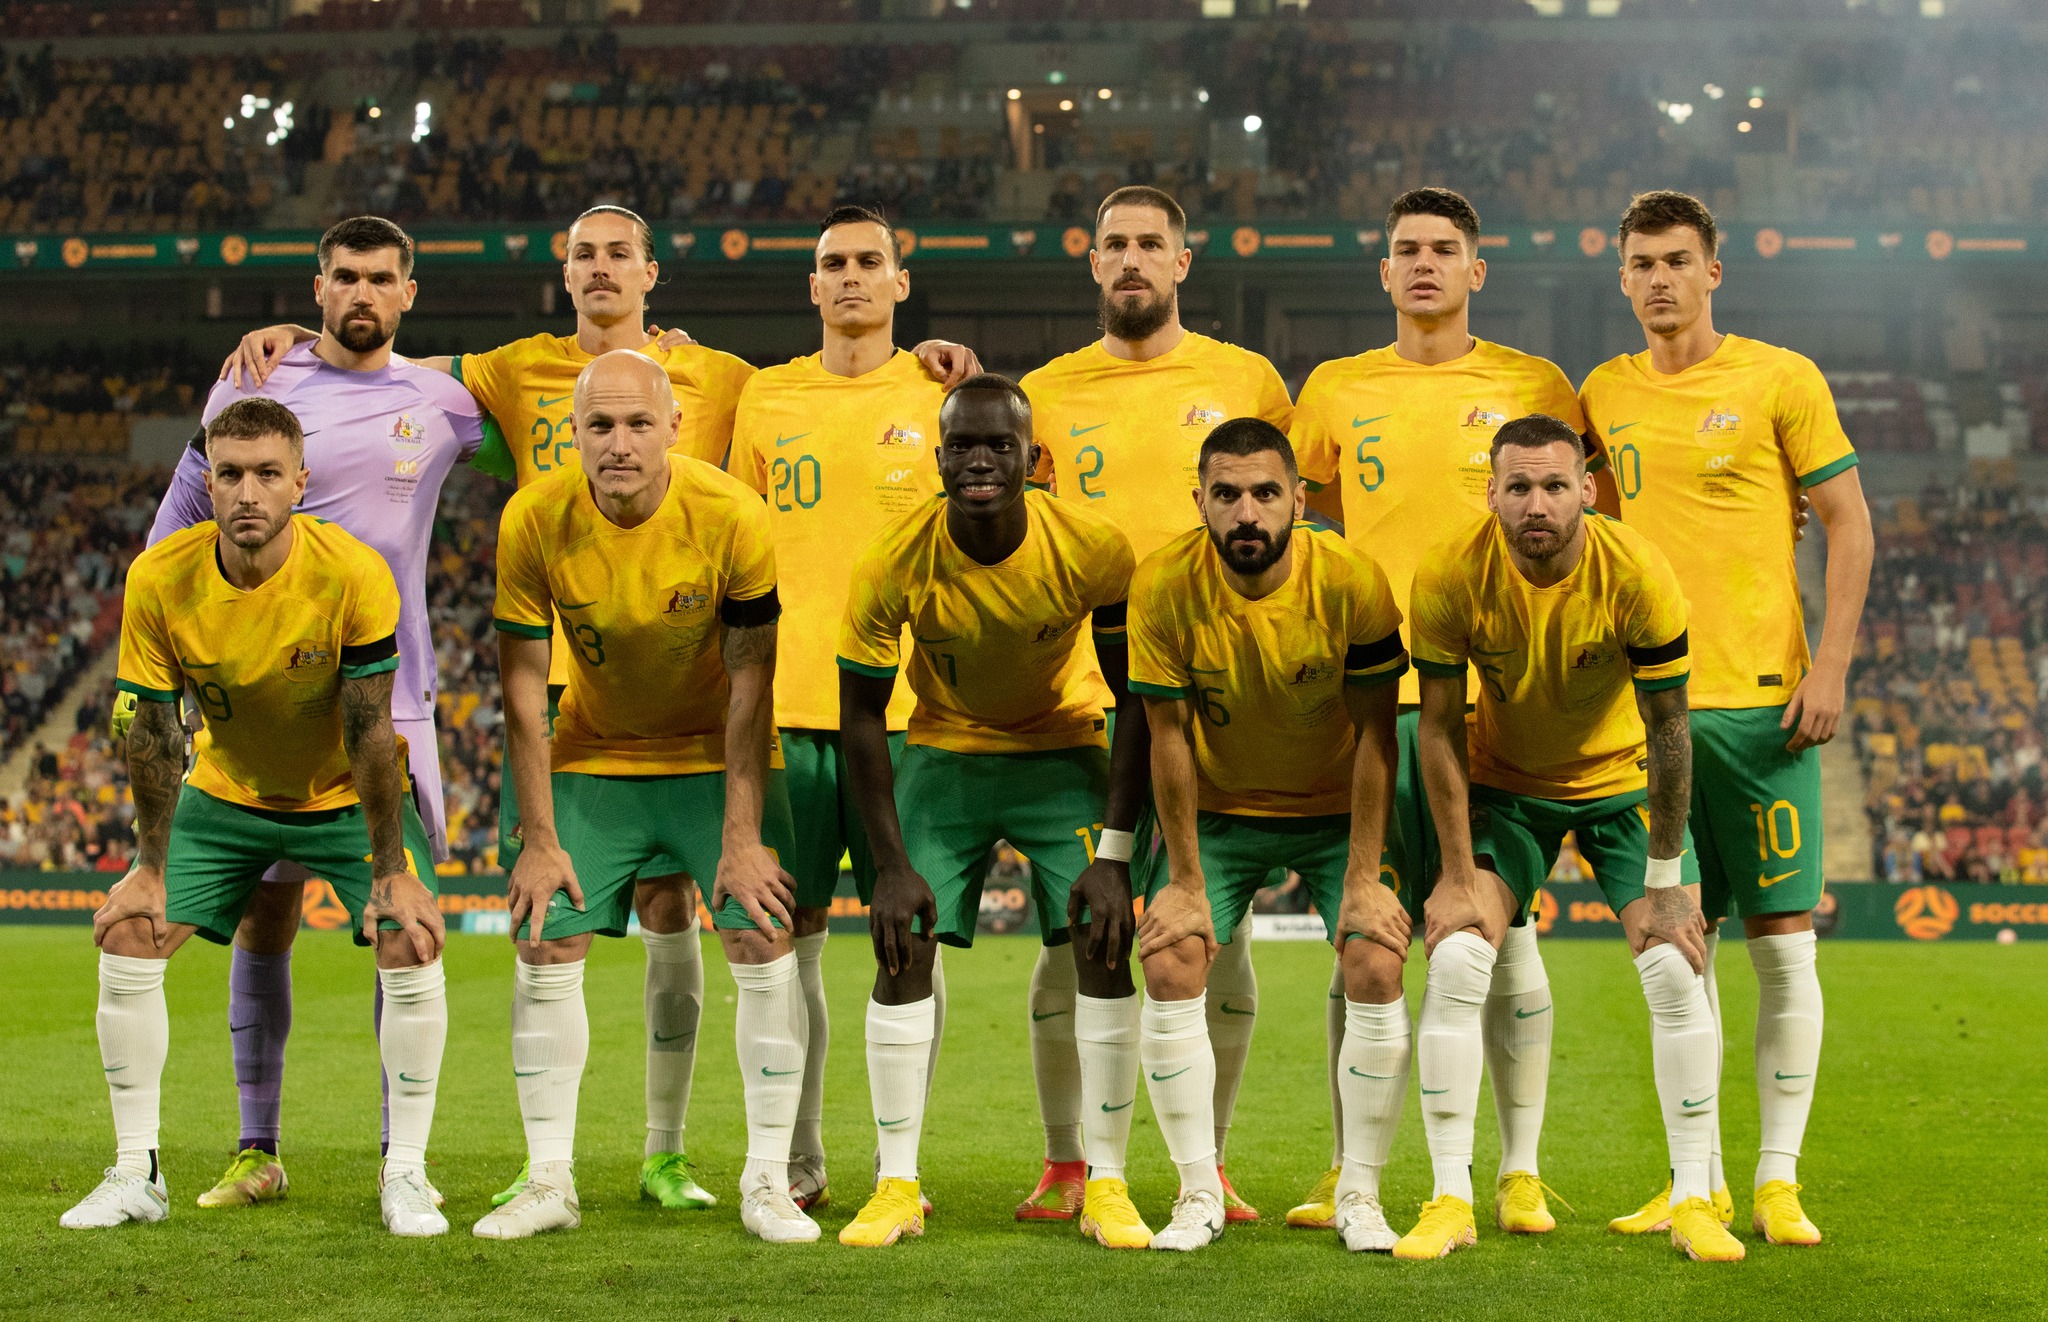 Socceroos World Cup Squad: Every Australian Heading To Qatar in 2022